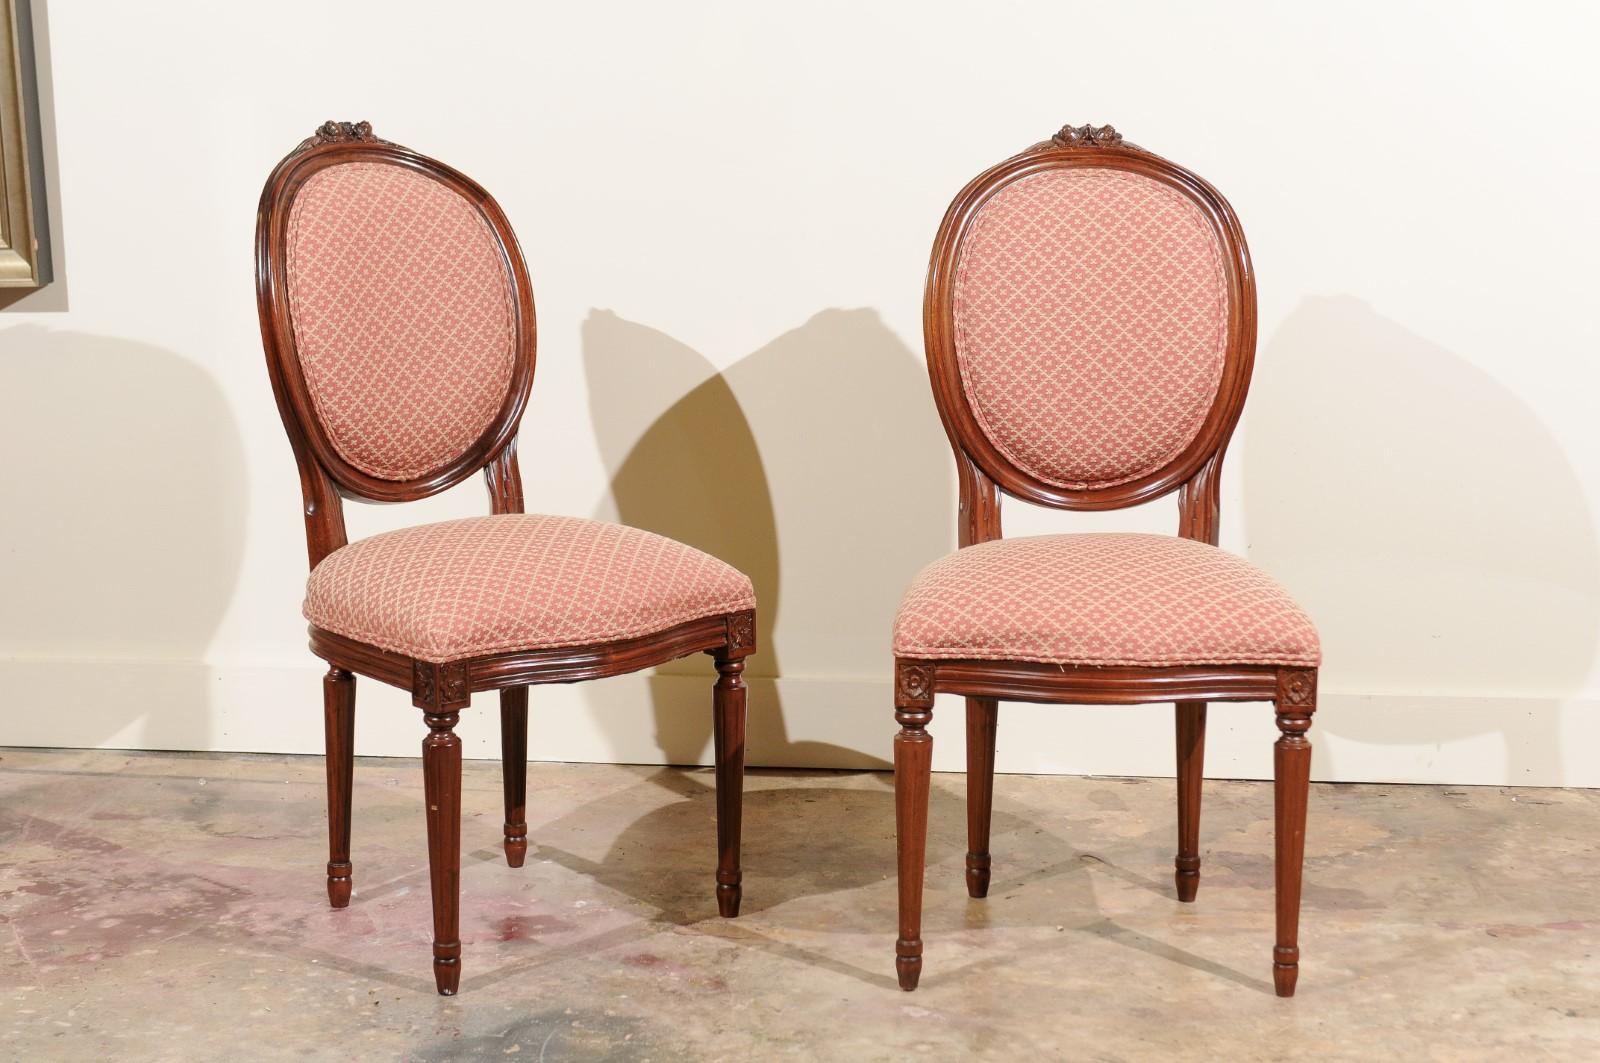 An elegant vintage set of Louis XVI carved oval back chairs. Fine carved detail on the arms. Rosette crest is above the four tapered and fluted legs.
The fabric is in good condition but one may want to update it. These chairs would look wonderful